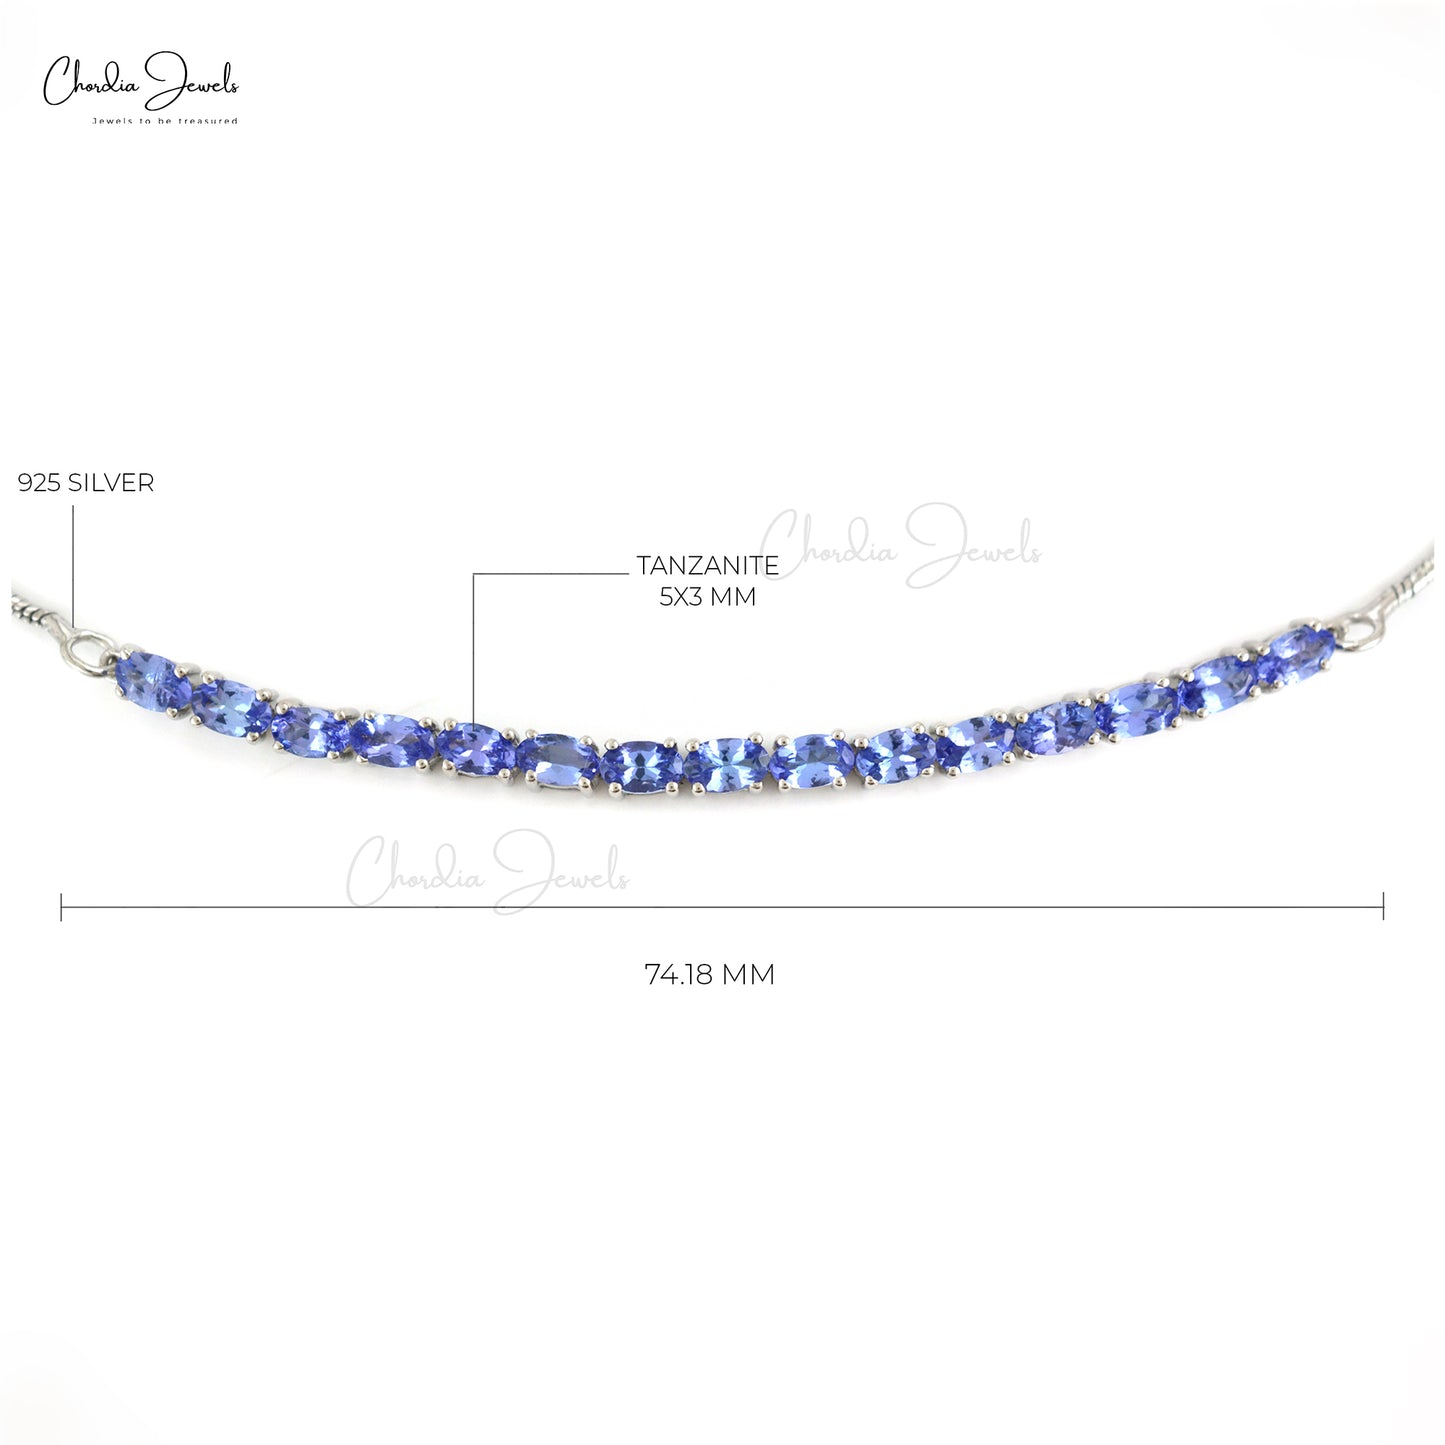 Natural Tanzanite Tennis Bracelet 925 Sterling Silver Oval Cut Gemstone Jewelry From Top Manufacturer At Offer Price